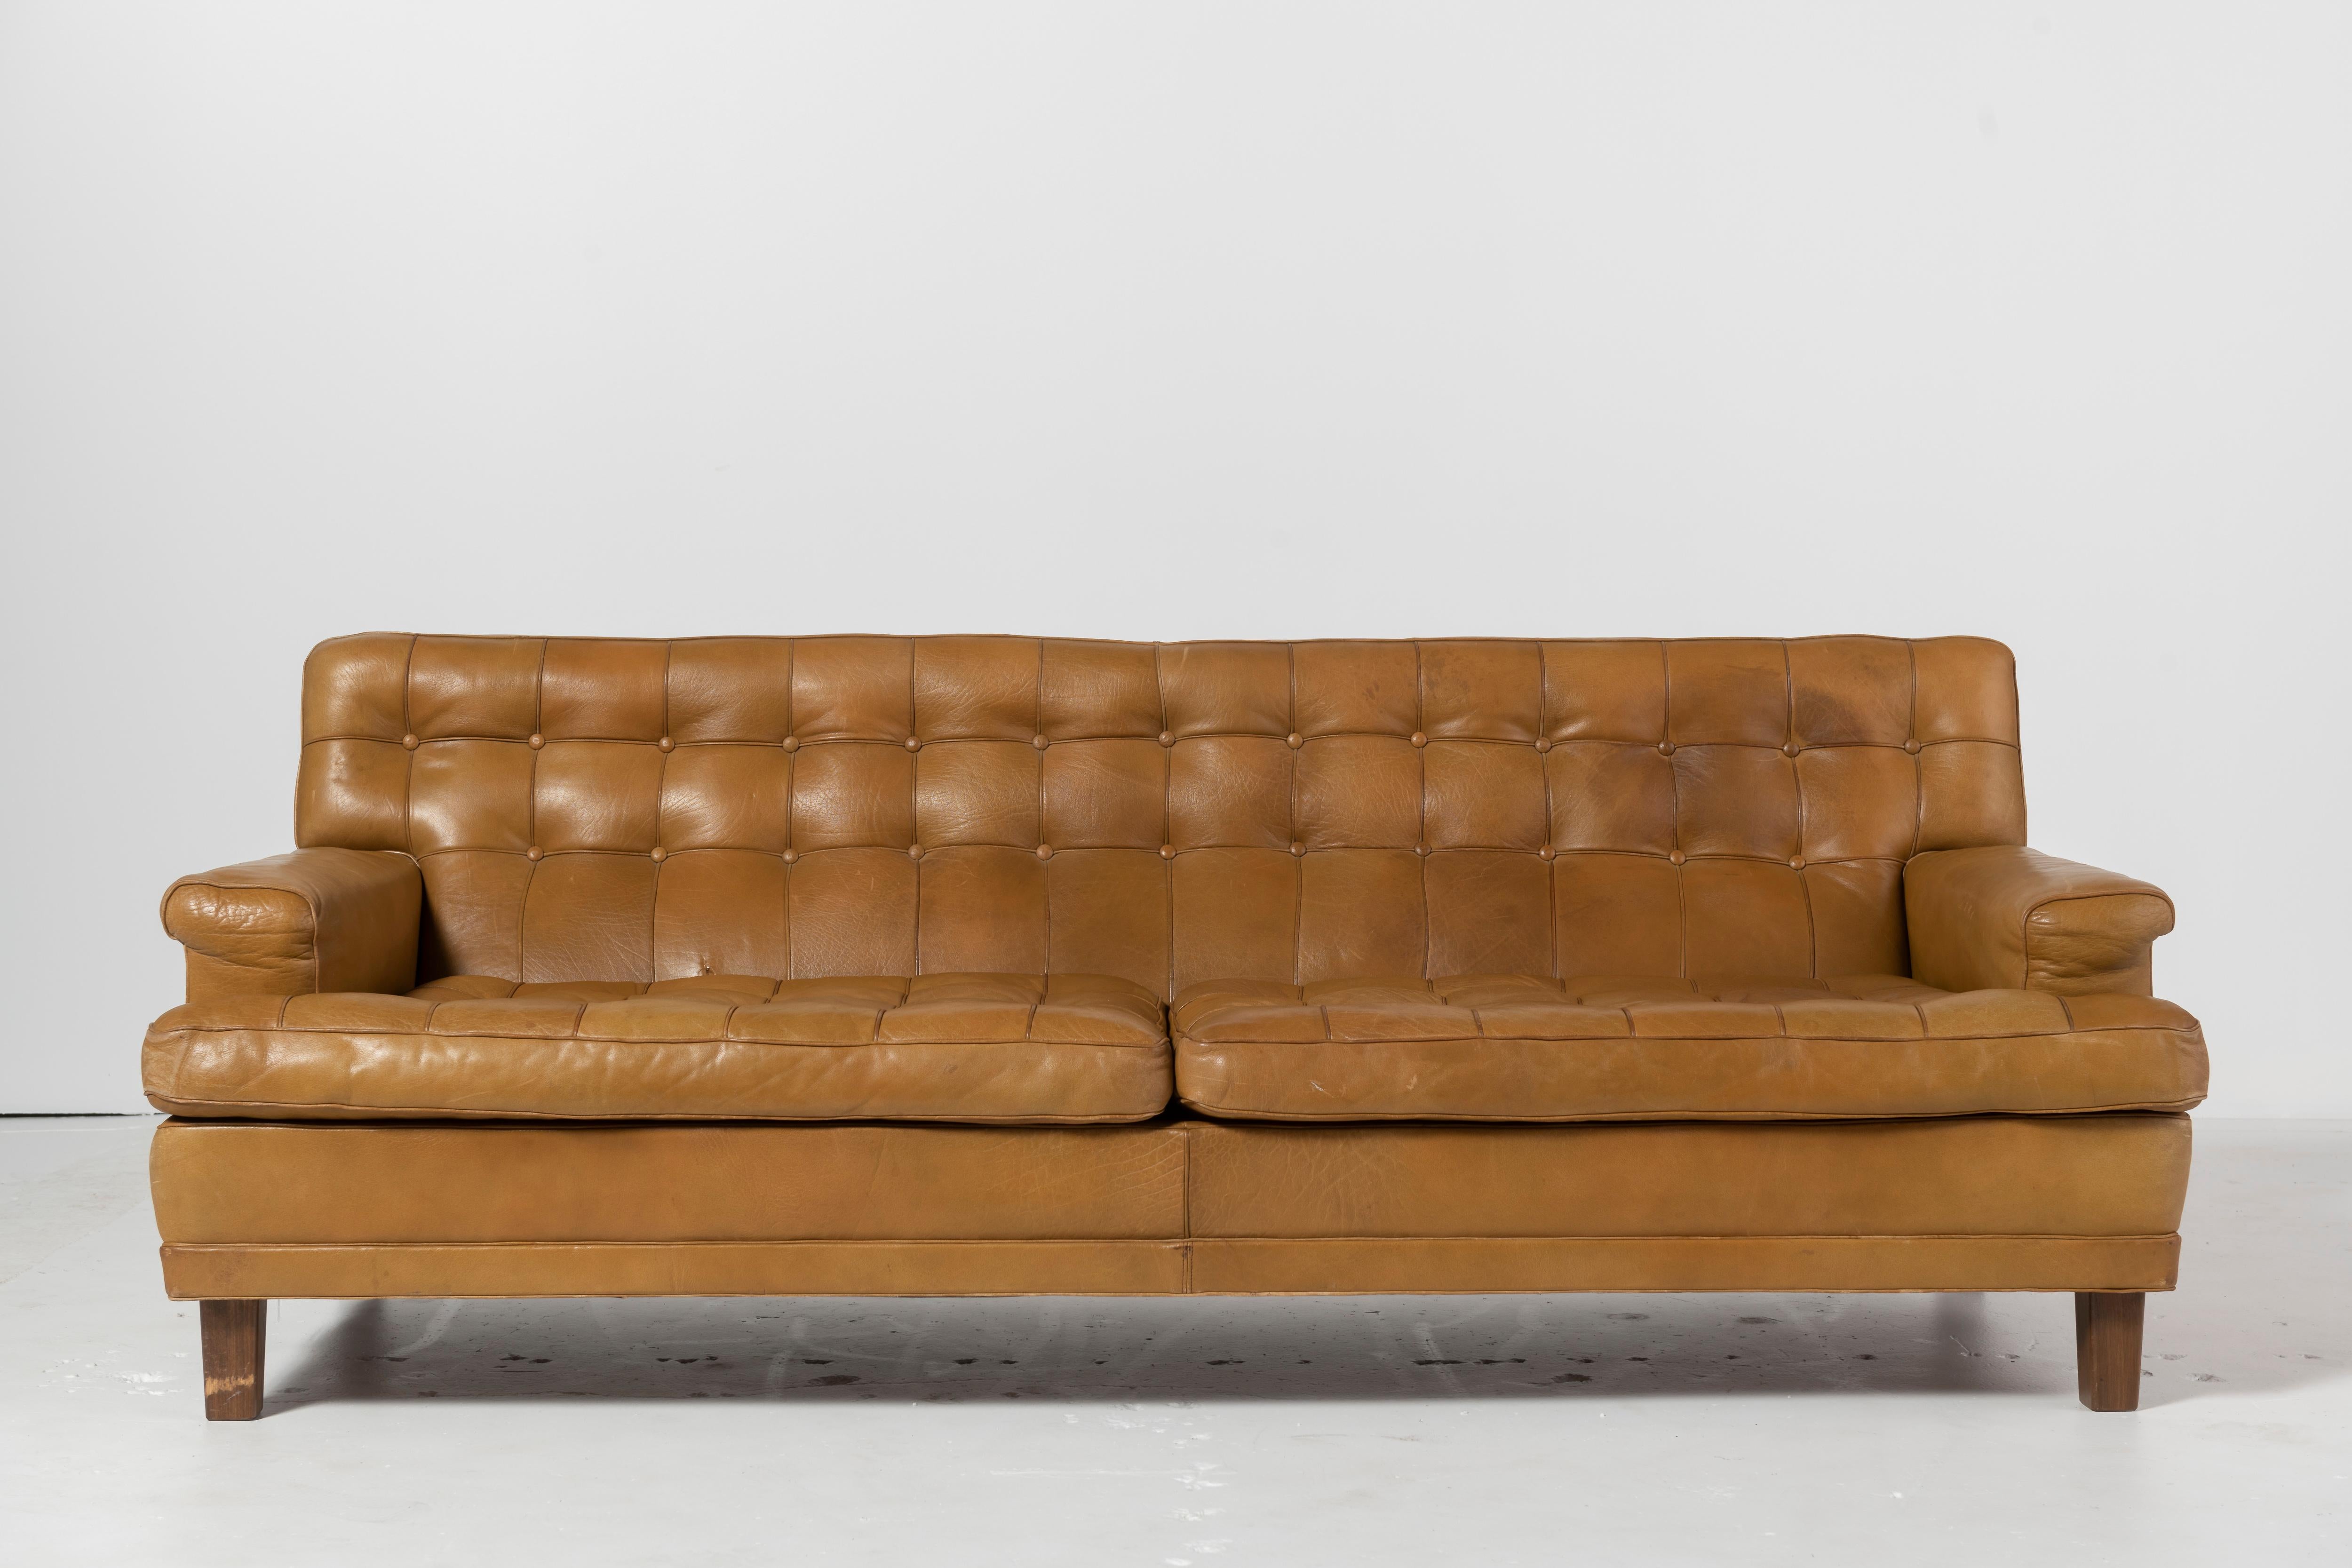 Classic Arne Norell sofa with original buffalo leather in cognac with walnut legs. Good condition and patina. Label intact.